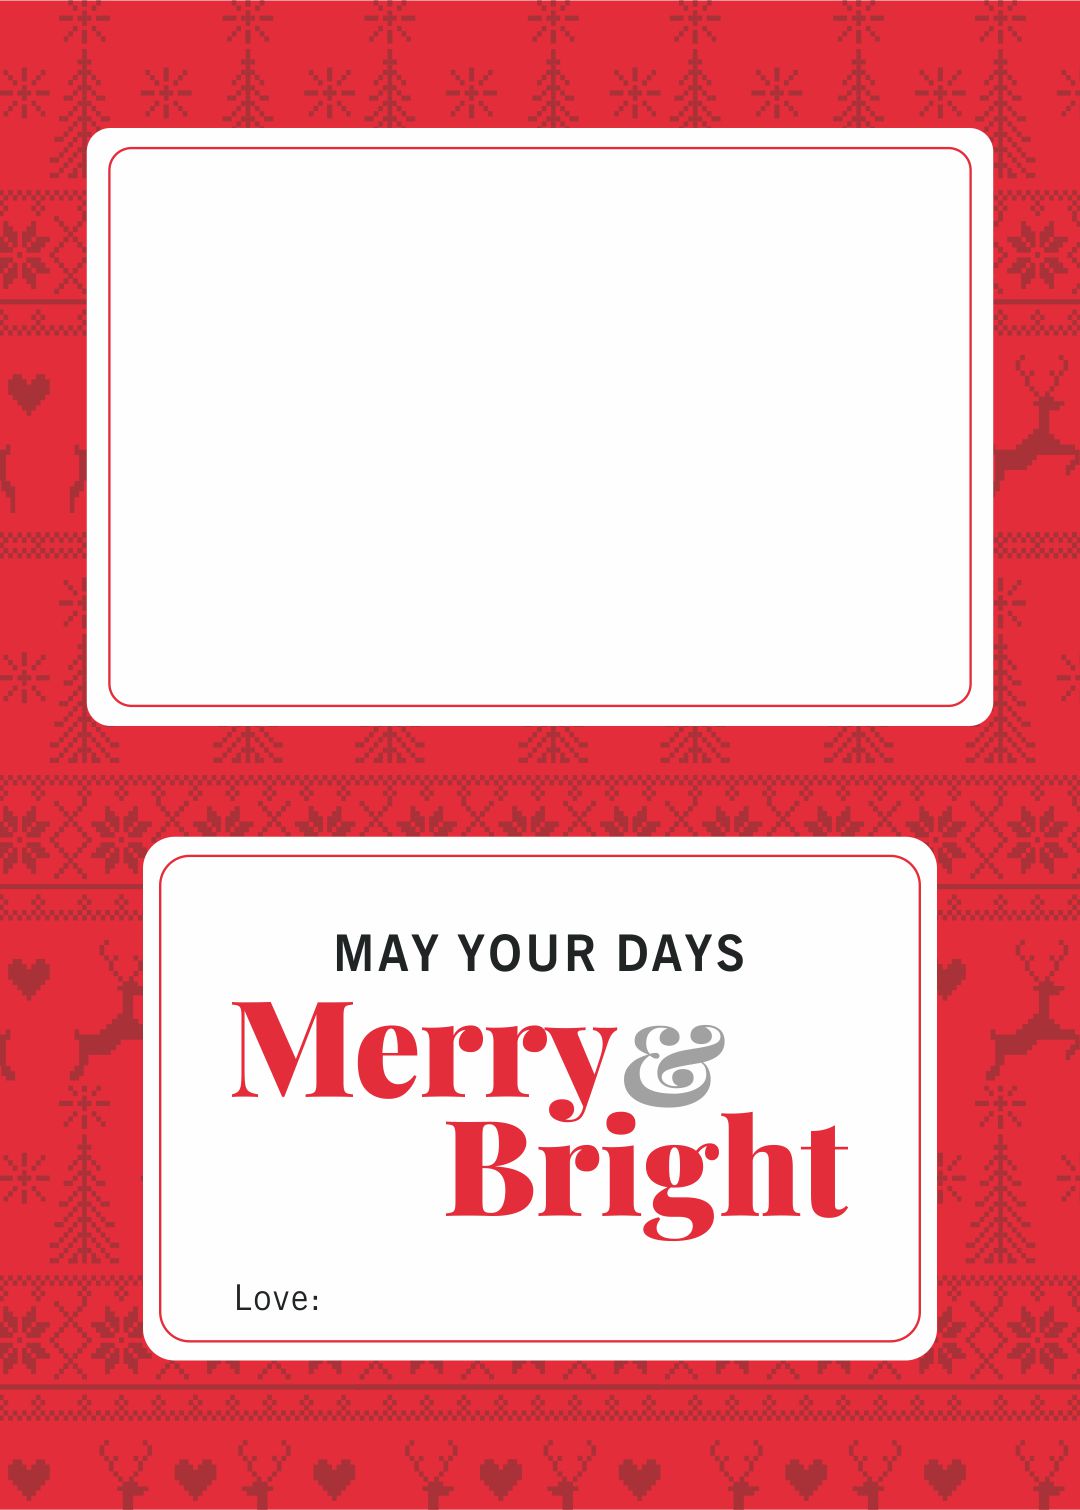 7 Best Images Of Merry Christmas Printable Teacher Gift Card Thanks A Latte Free Printable 